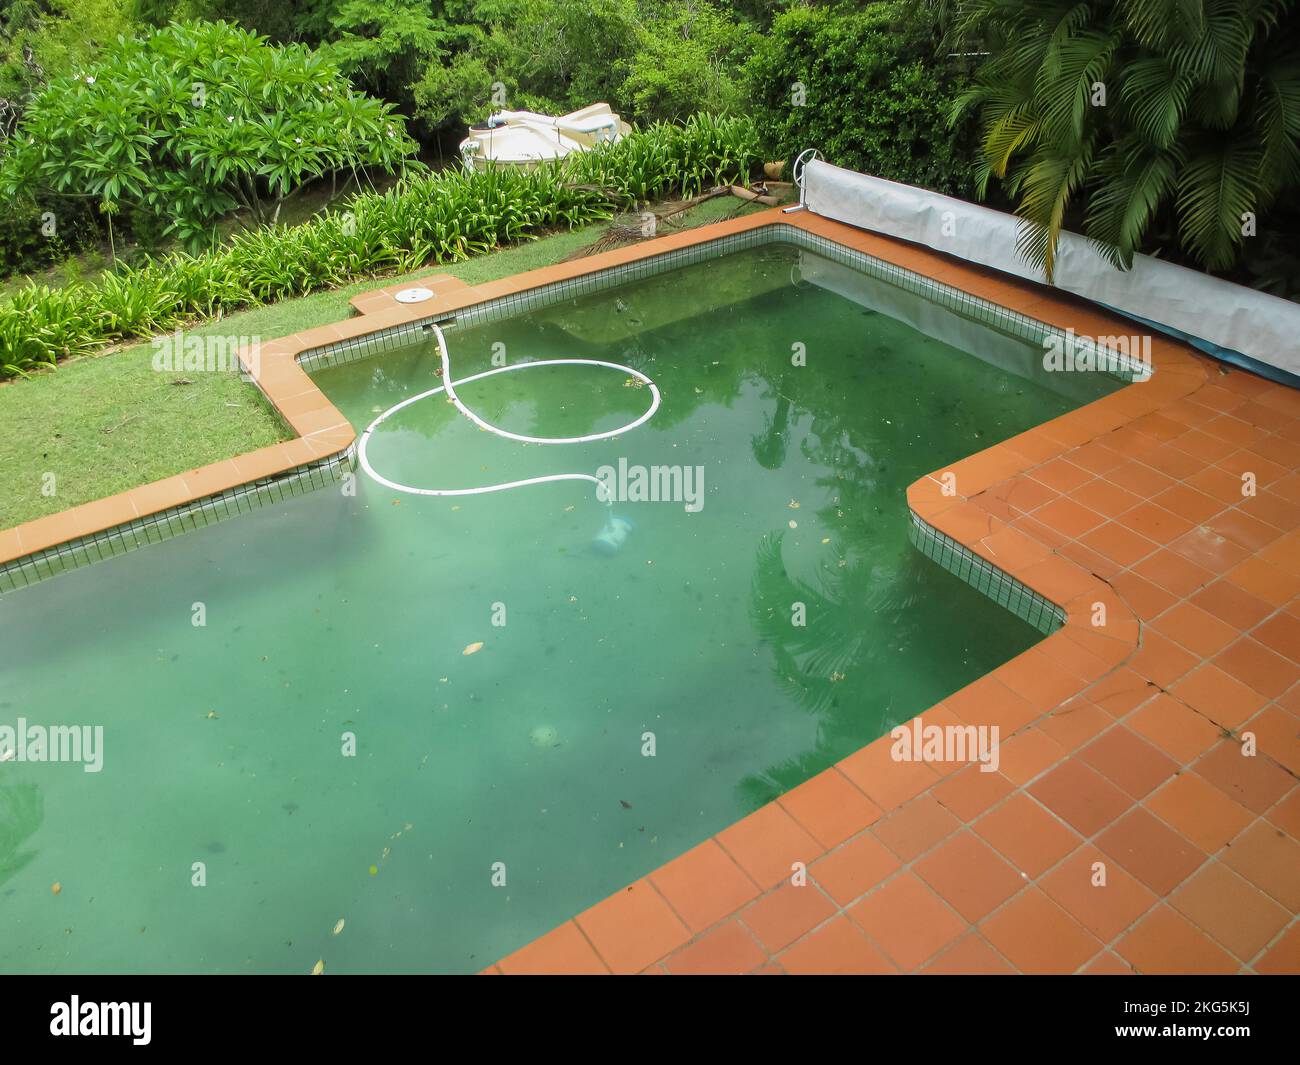 Looking down on a dirty green swimming pool with a vaccum in it surrounded by tropical trees and with a cover rolled up to one side Stock Photo